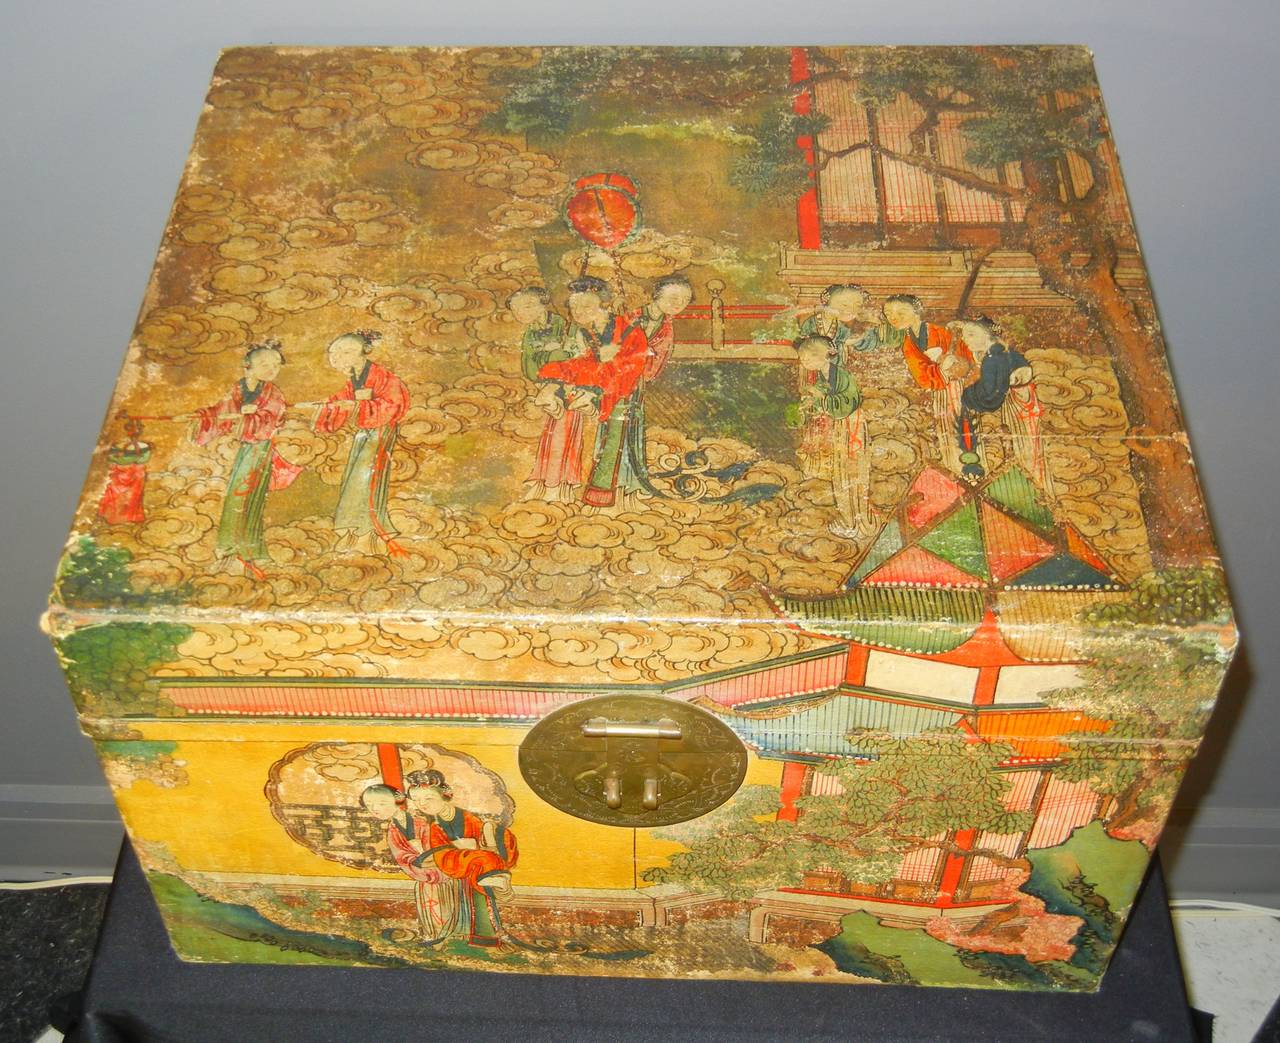 This Chinese travel trunk is composed of a camphorwood base covered by pigskin hand-painted with 19th century figures in traditional dress and hairstyles who inhabit landscaped gardens and courtly pavilions. The brass hardware includes hinges, two